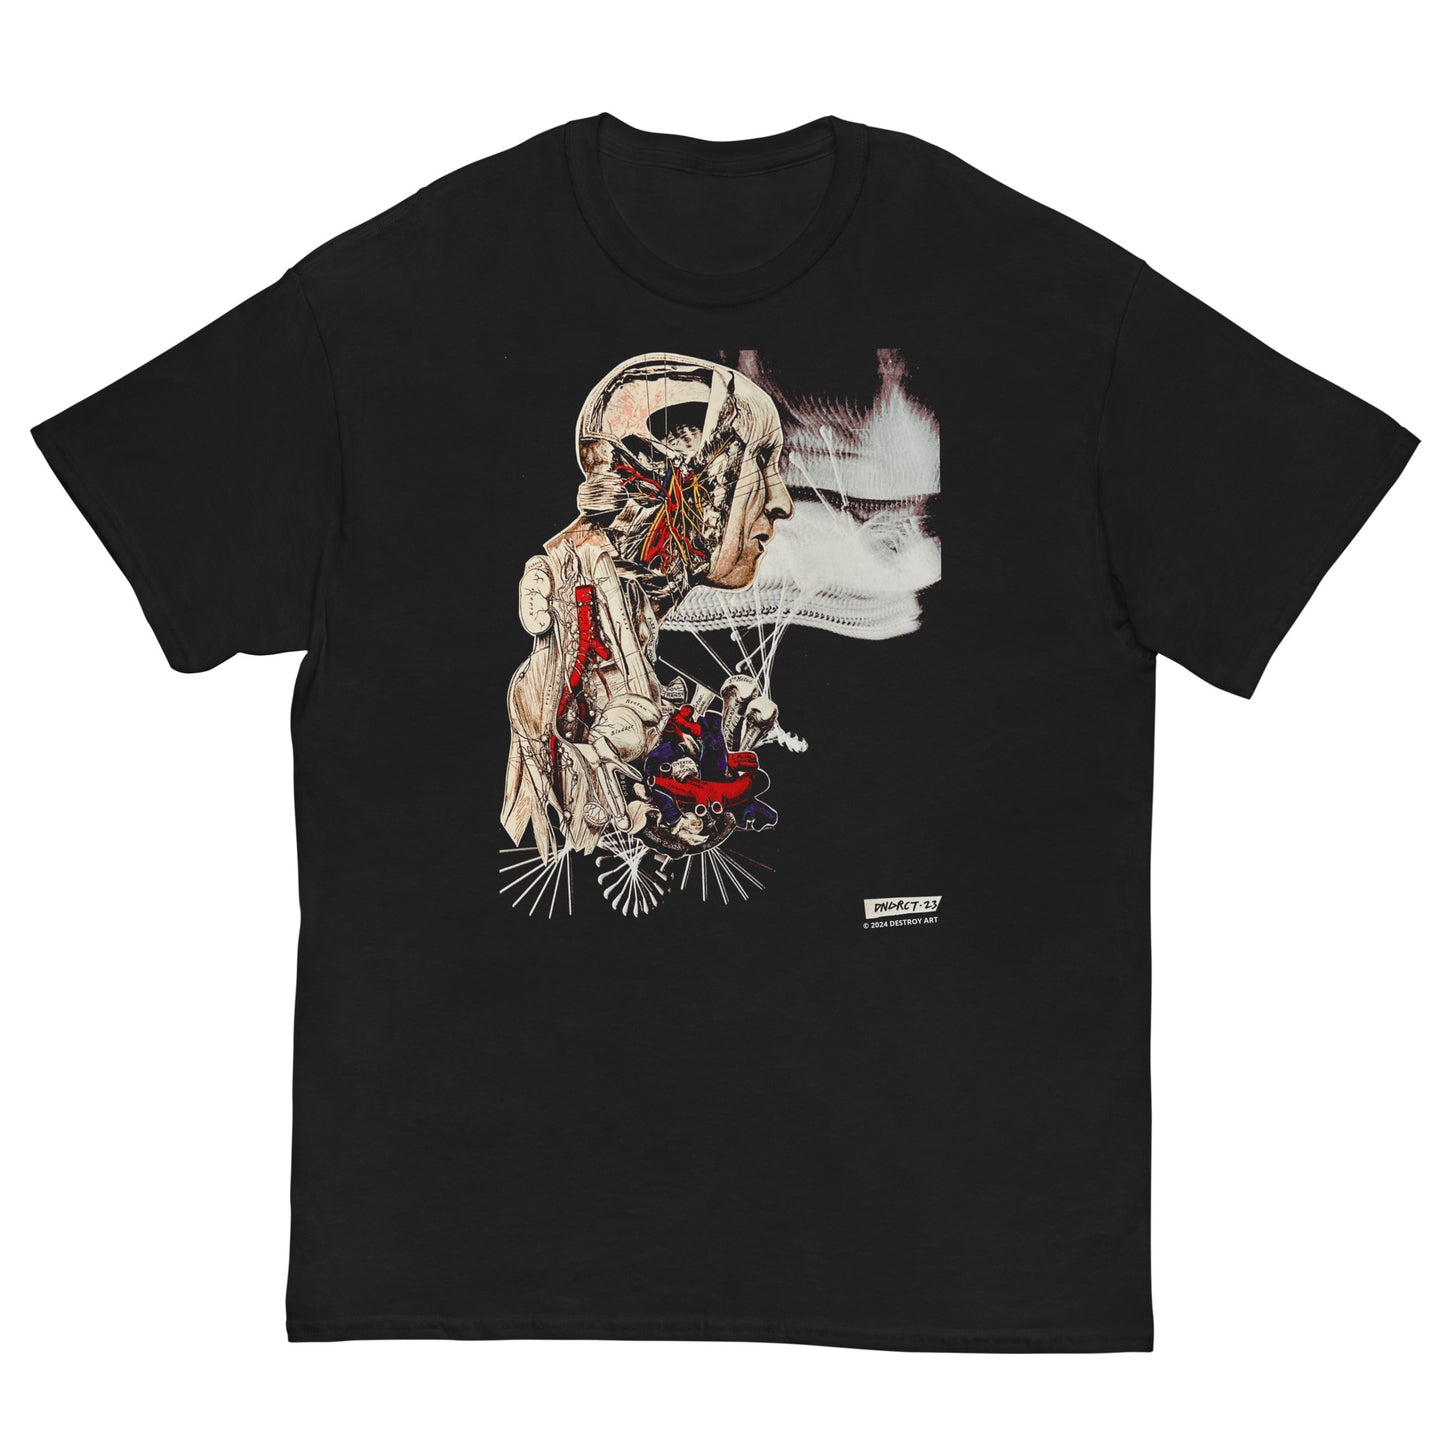 DNGRCT "Humanoid Android Morgue" Tee